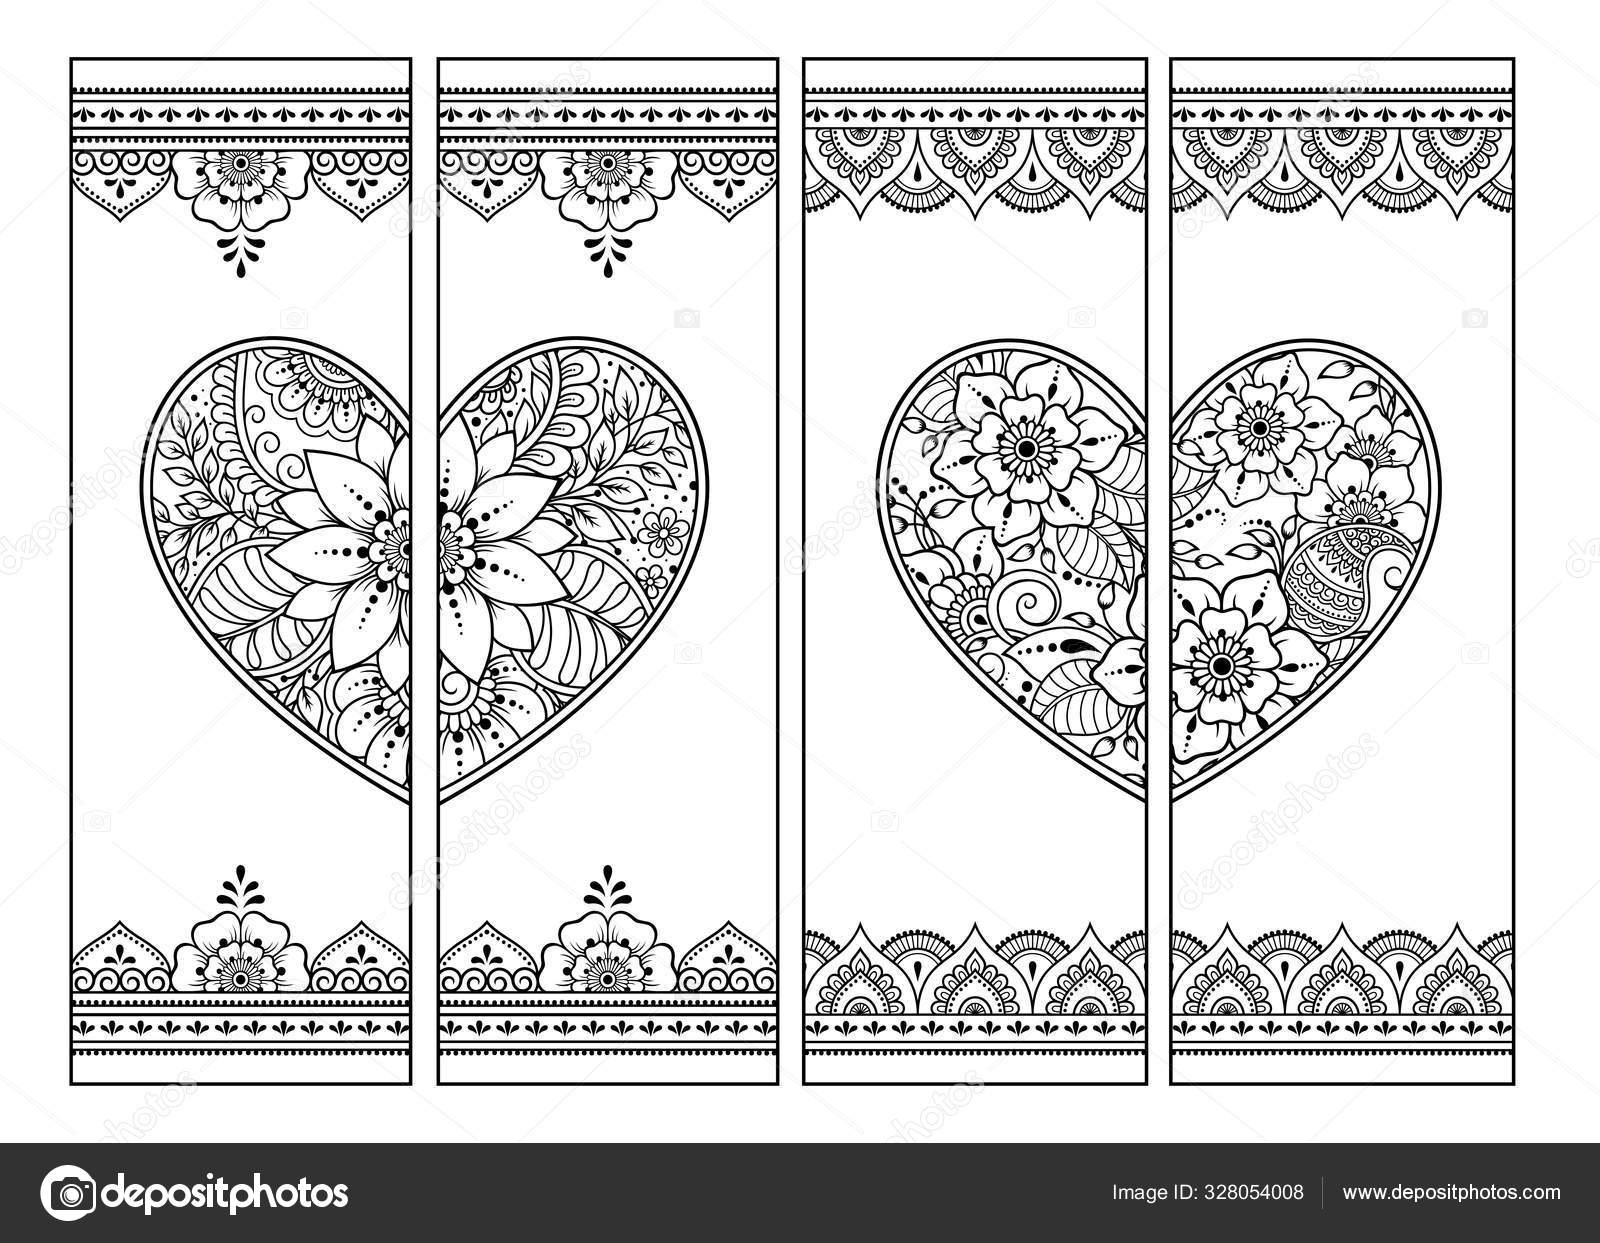 printable bookmark book coloring set black white labels heart flower stock vector image by c rugame tera gmail com 328054008